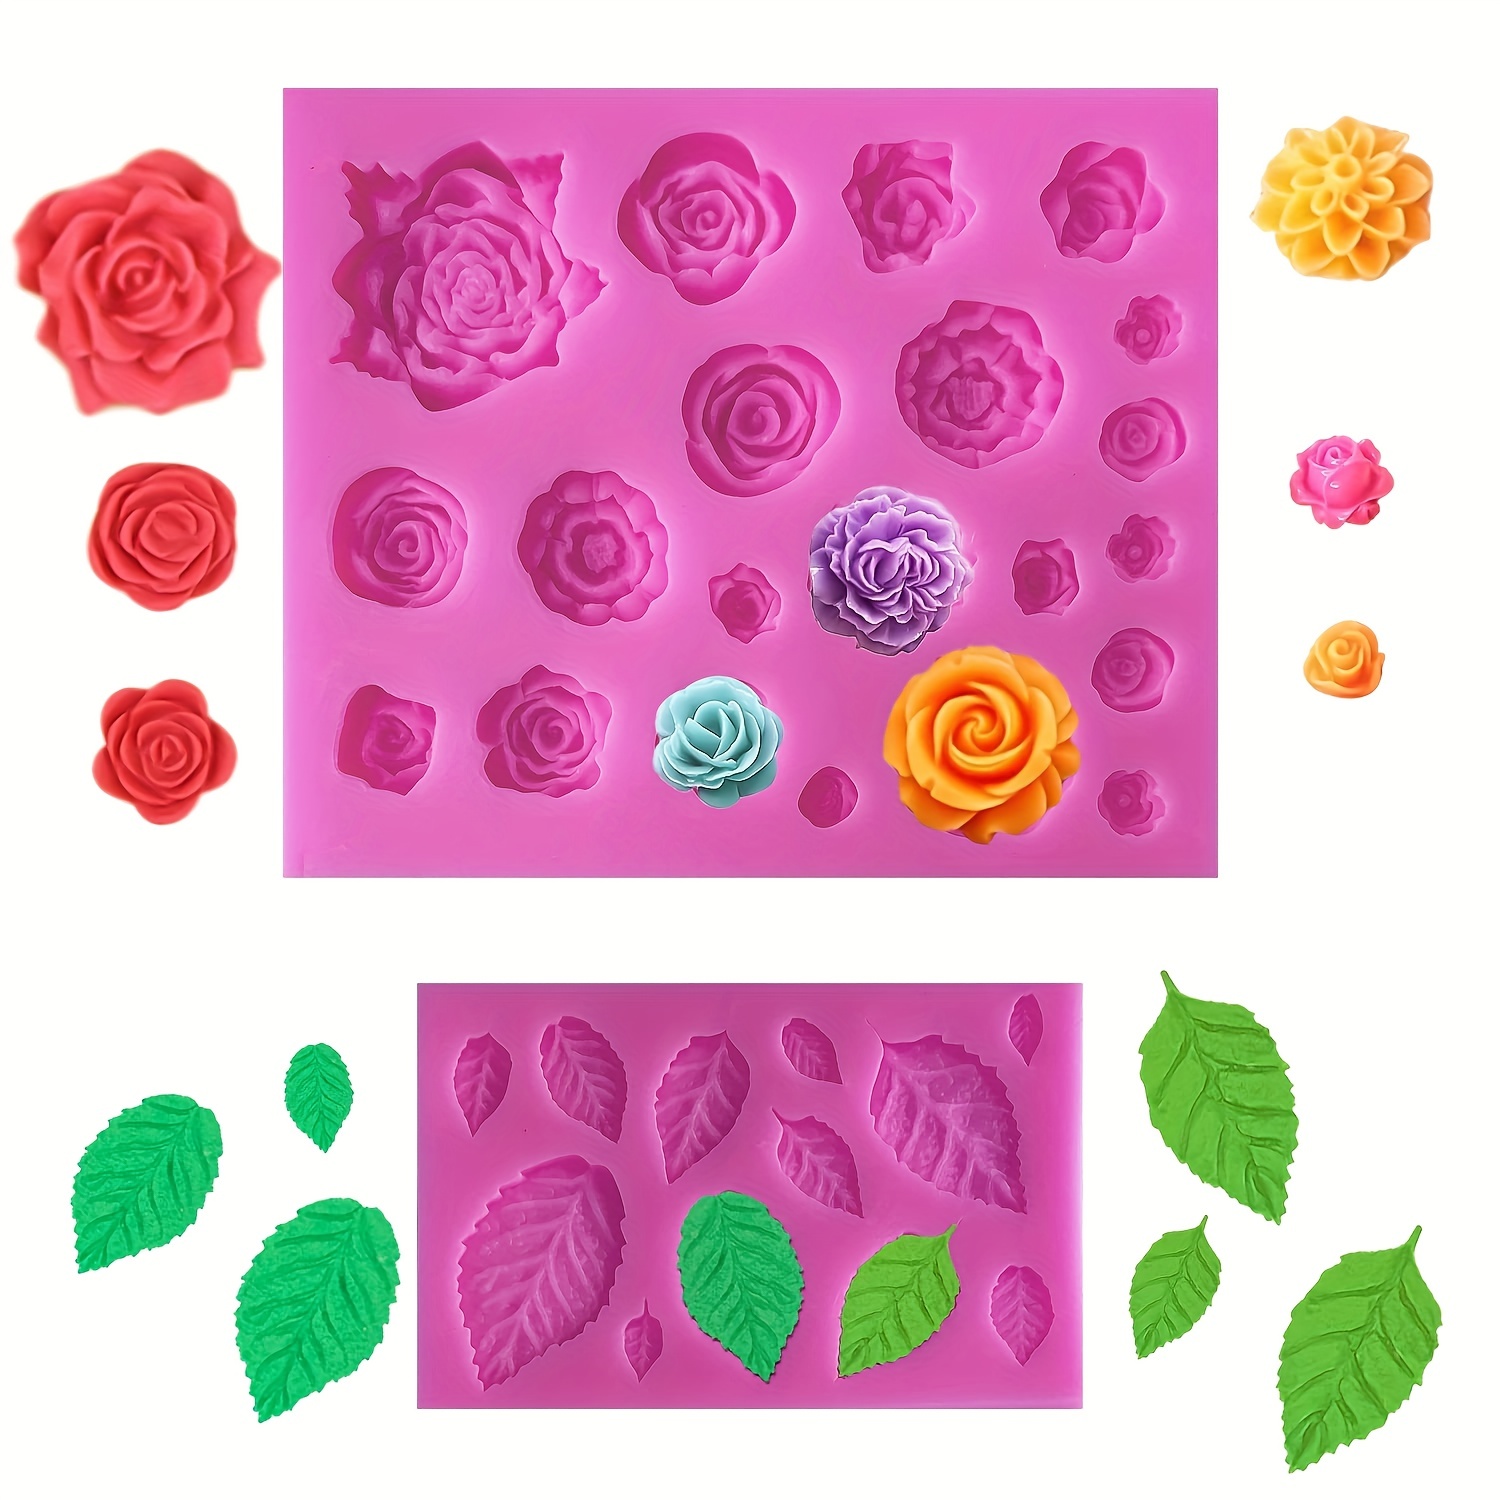 Silicone molds of flowers and leaves in